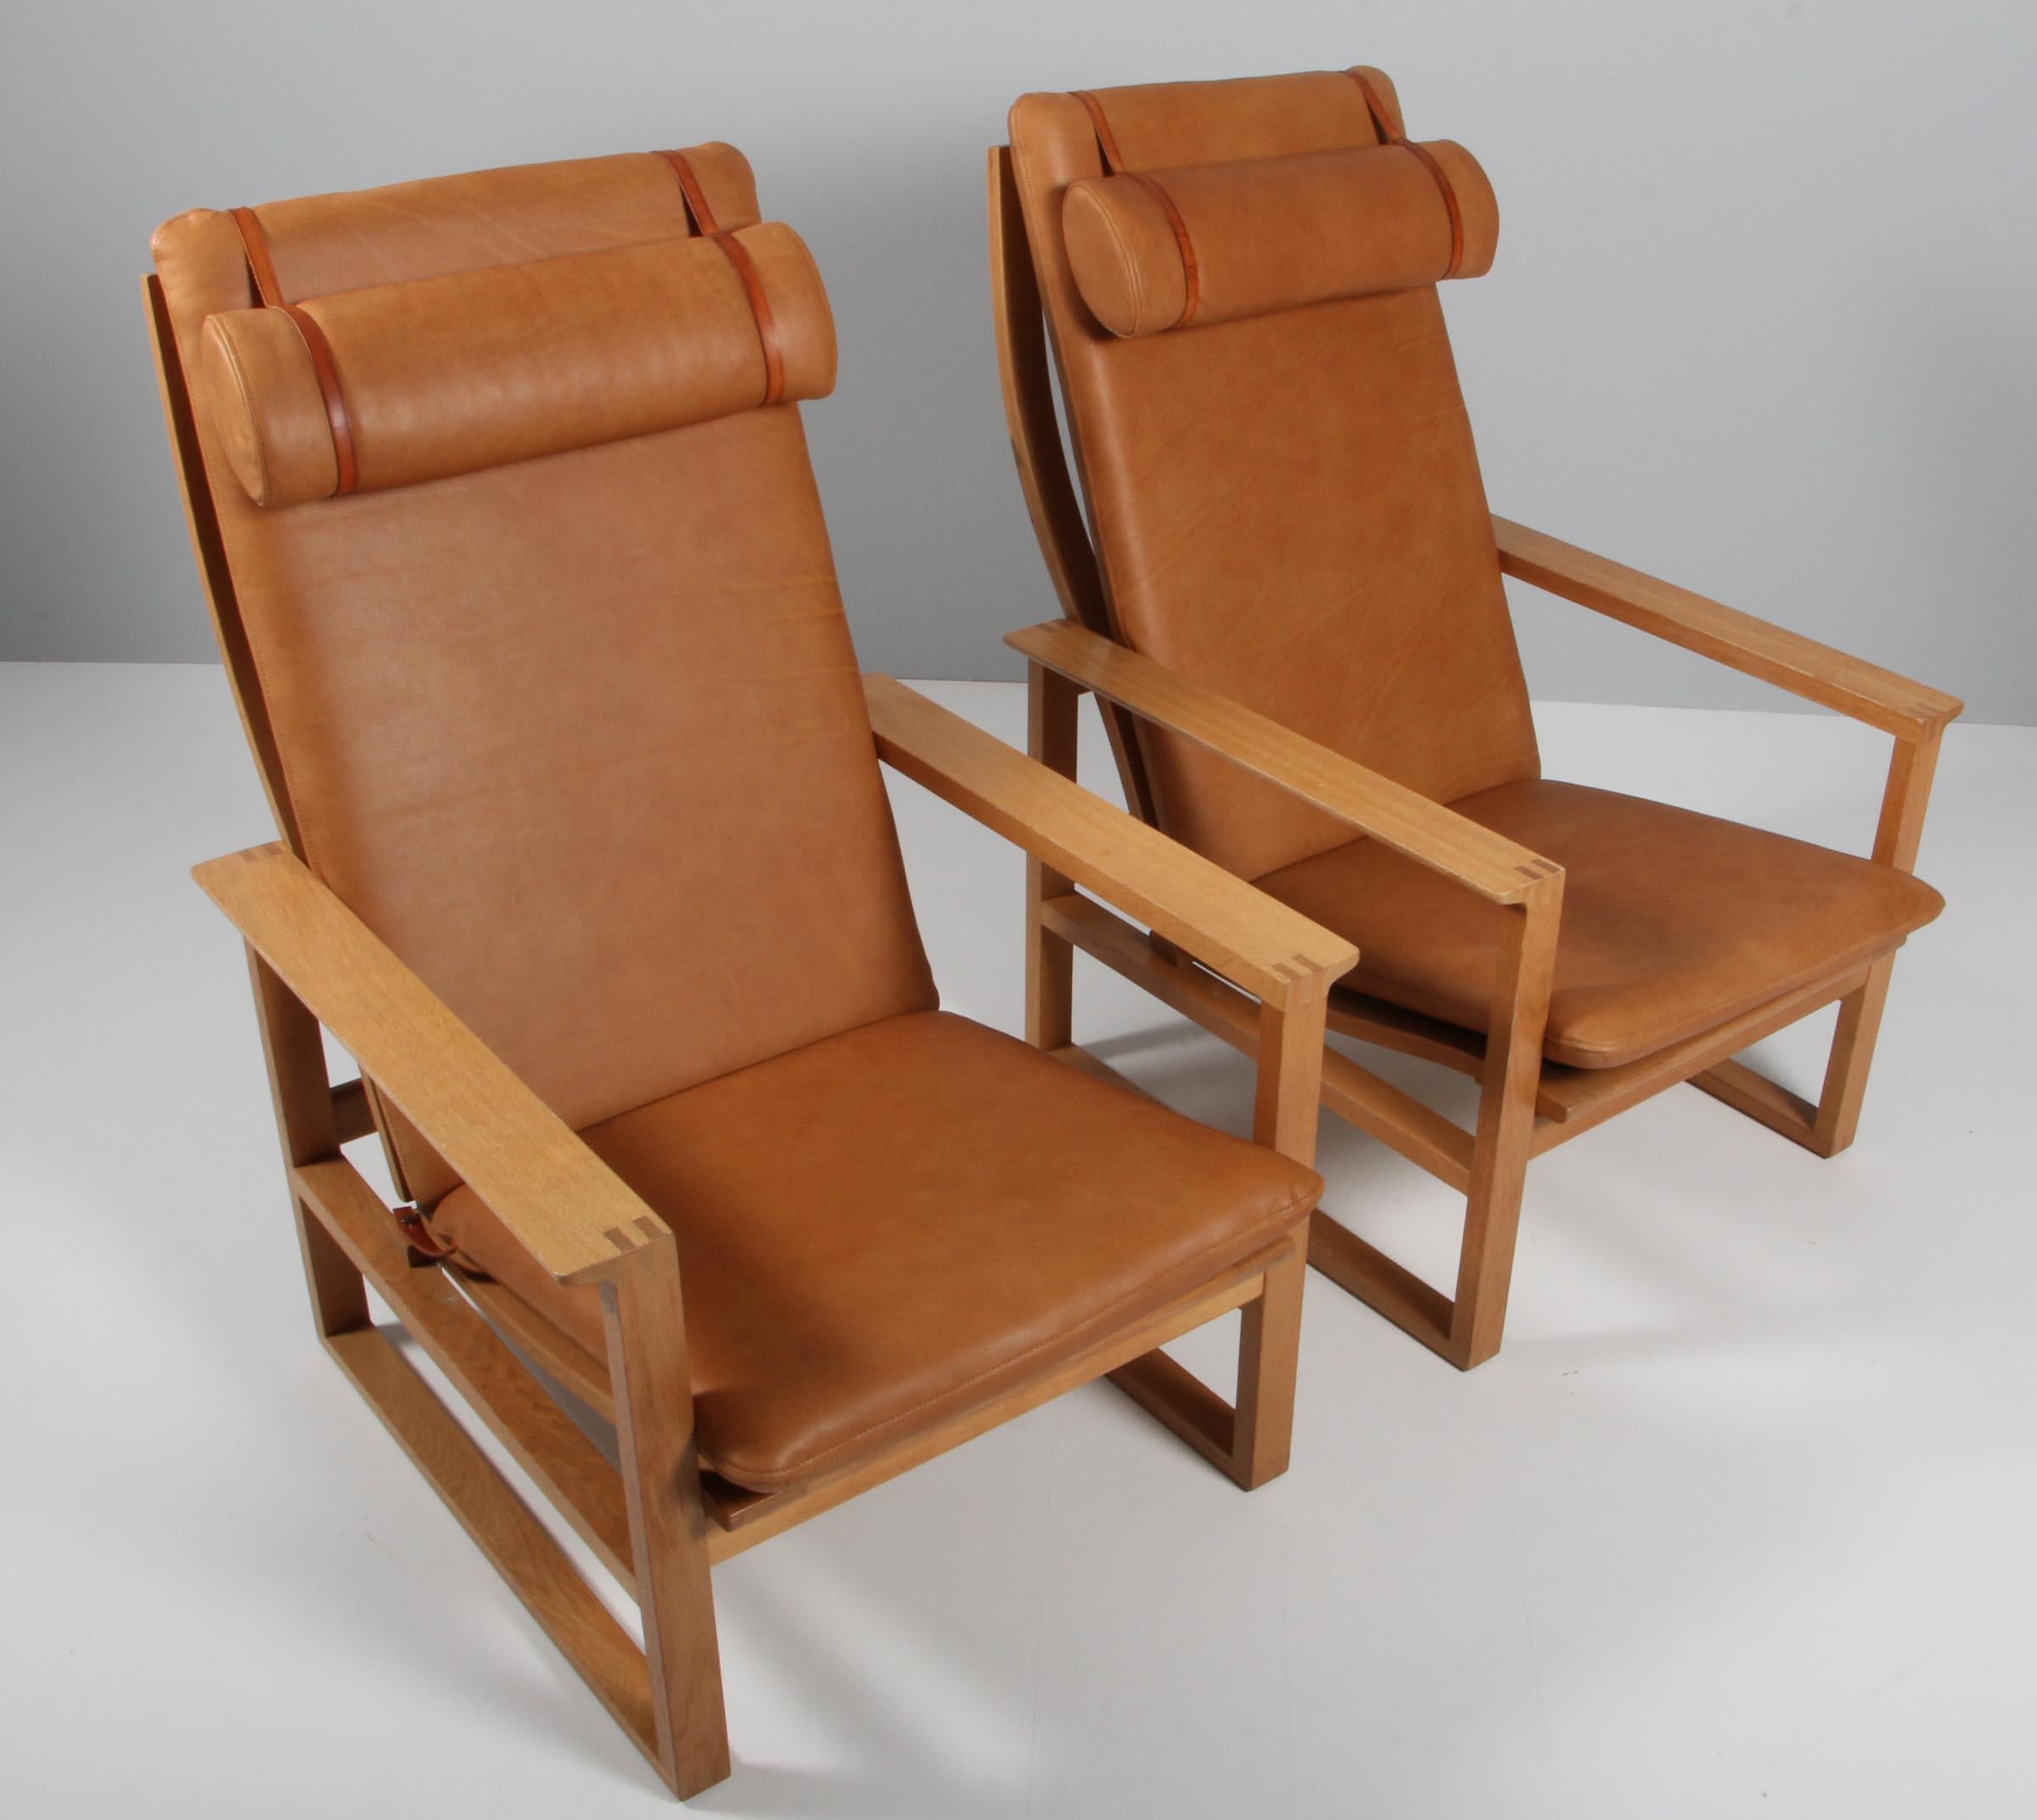 A Børge Mogensen lounge chairs designed in 1956 model number 2254 for Fredericia Stolefabrik. Cubical frames made of solid oak with finger joints.

New upholstered with vintage aniline leather. The seat cushion can be fixed with a leather strap